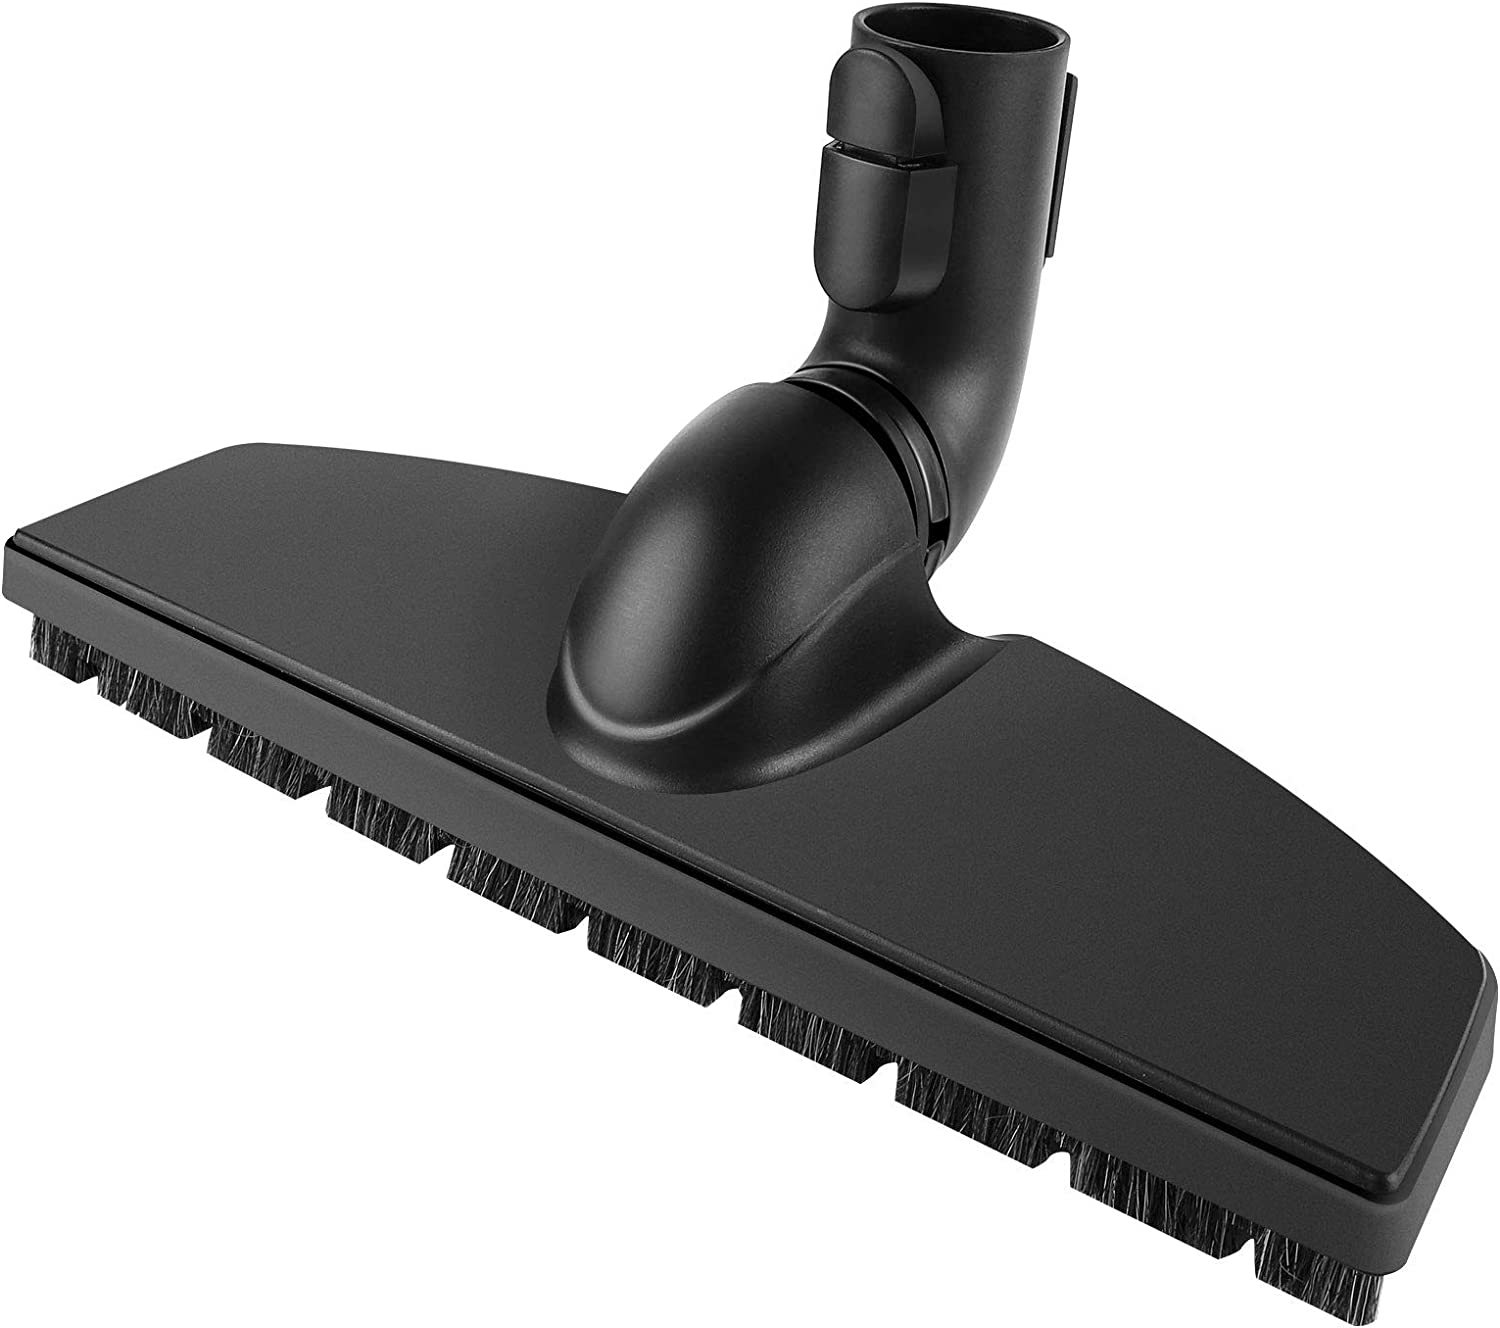 KEEPOW Replacement Floor Brush Attachment for Miele